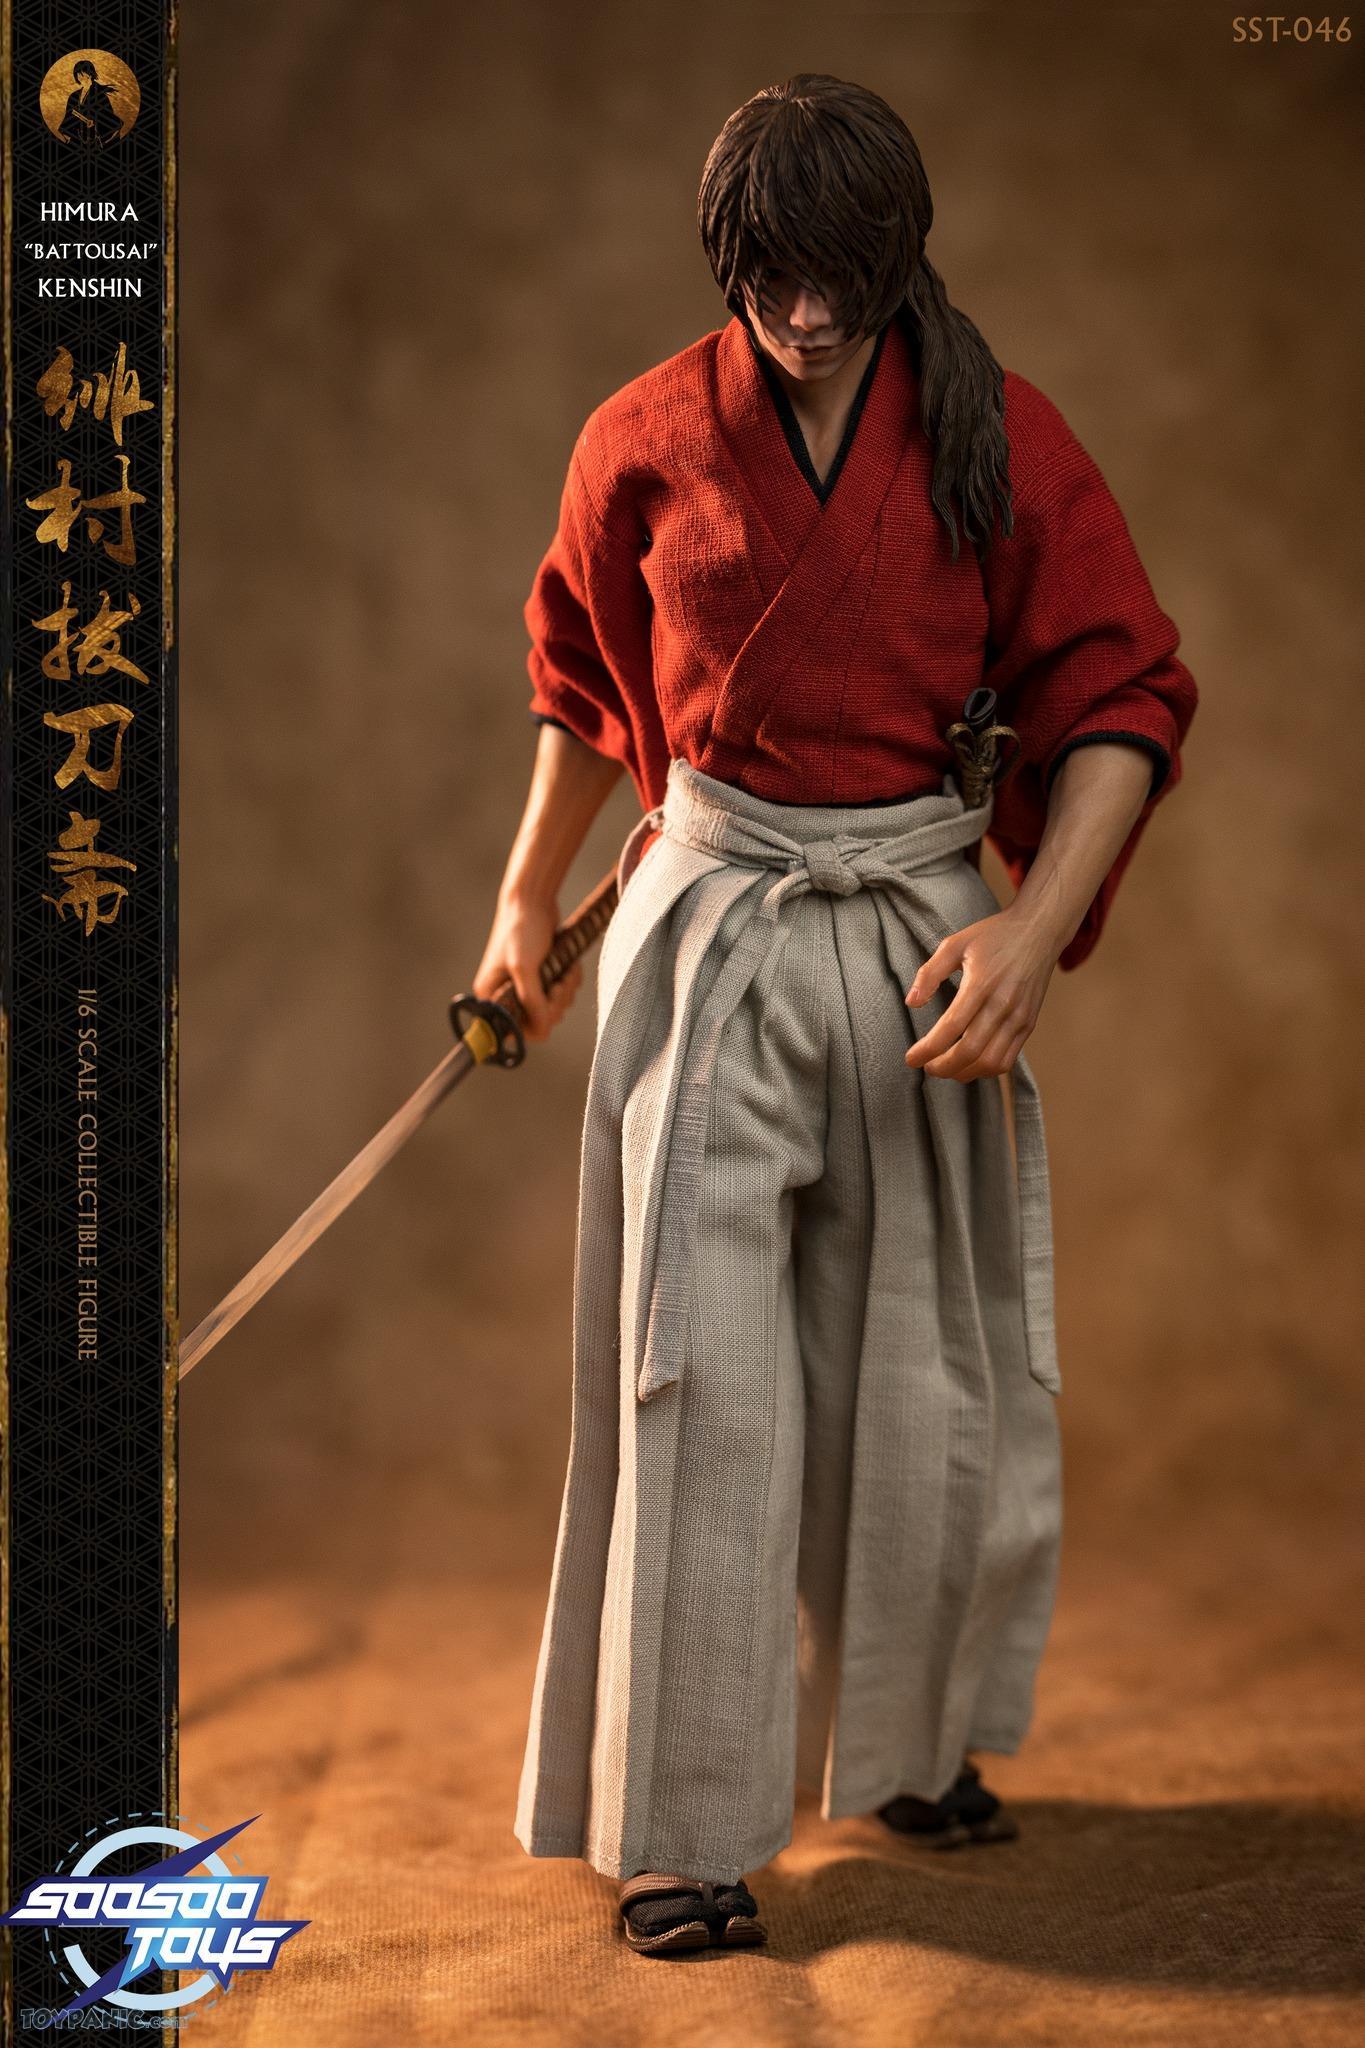 himura - NEW PRODUCT: 1/6 scale Rurouni Kenshin Collectible Figure from SooSooToys 712202251232PM_5173529